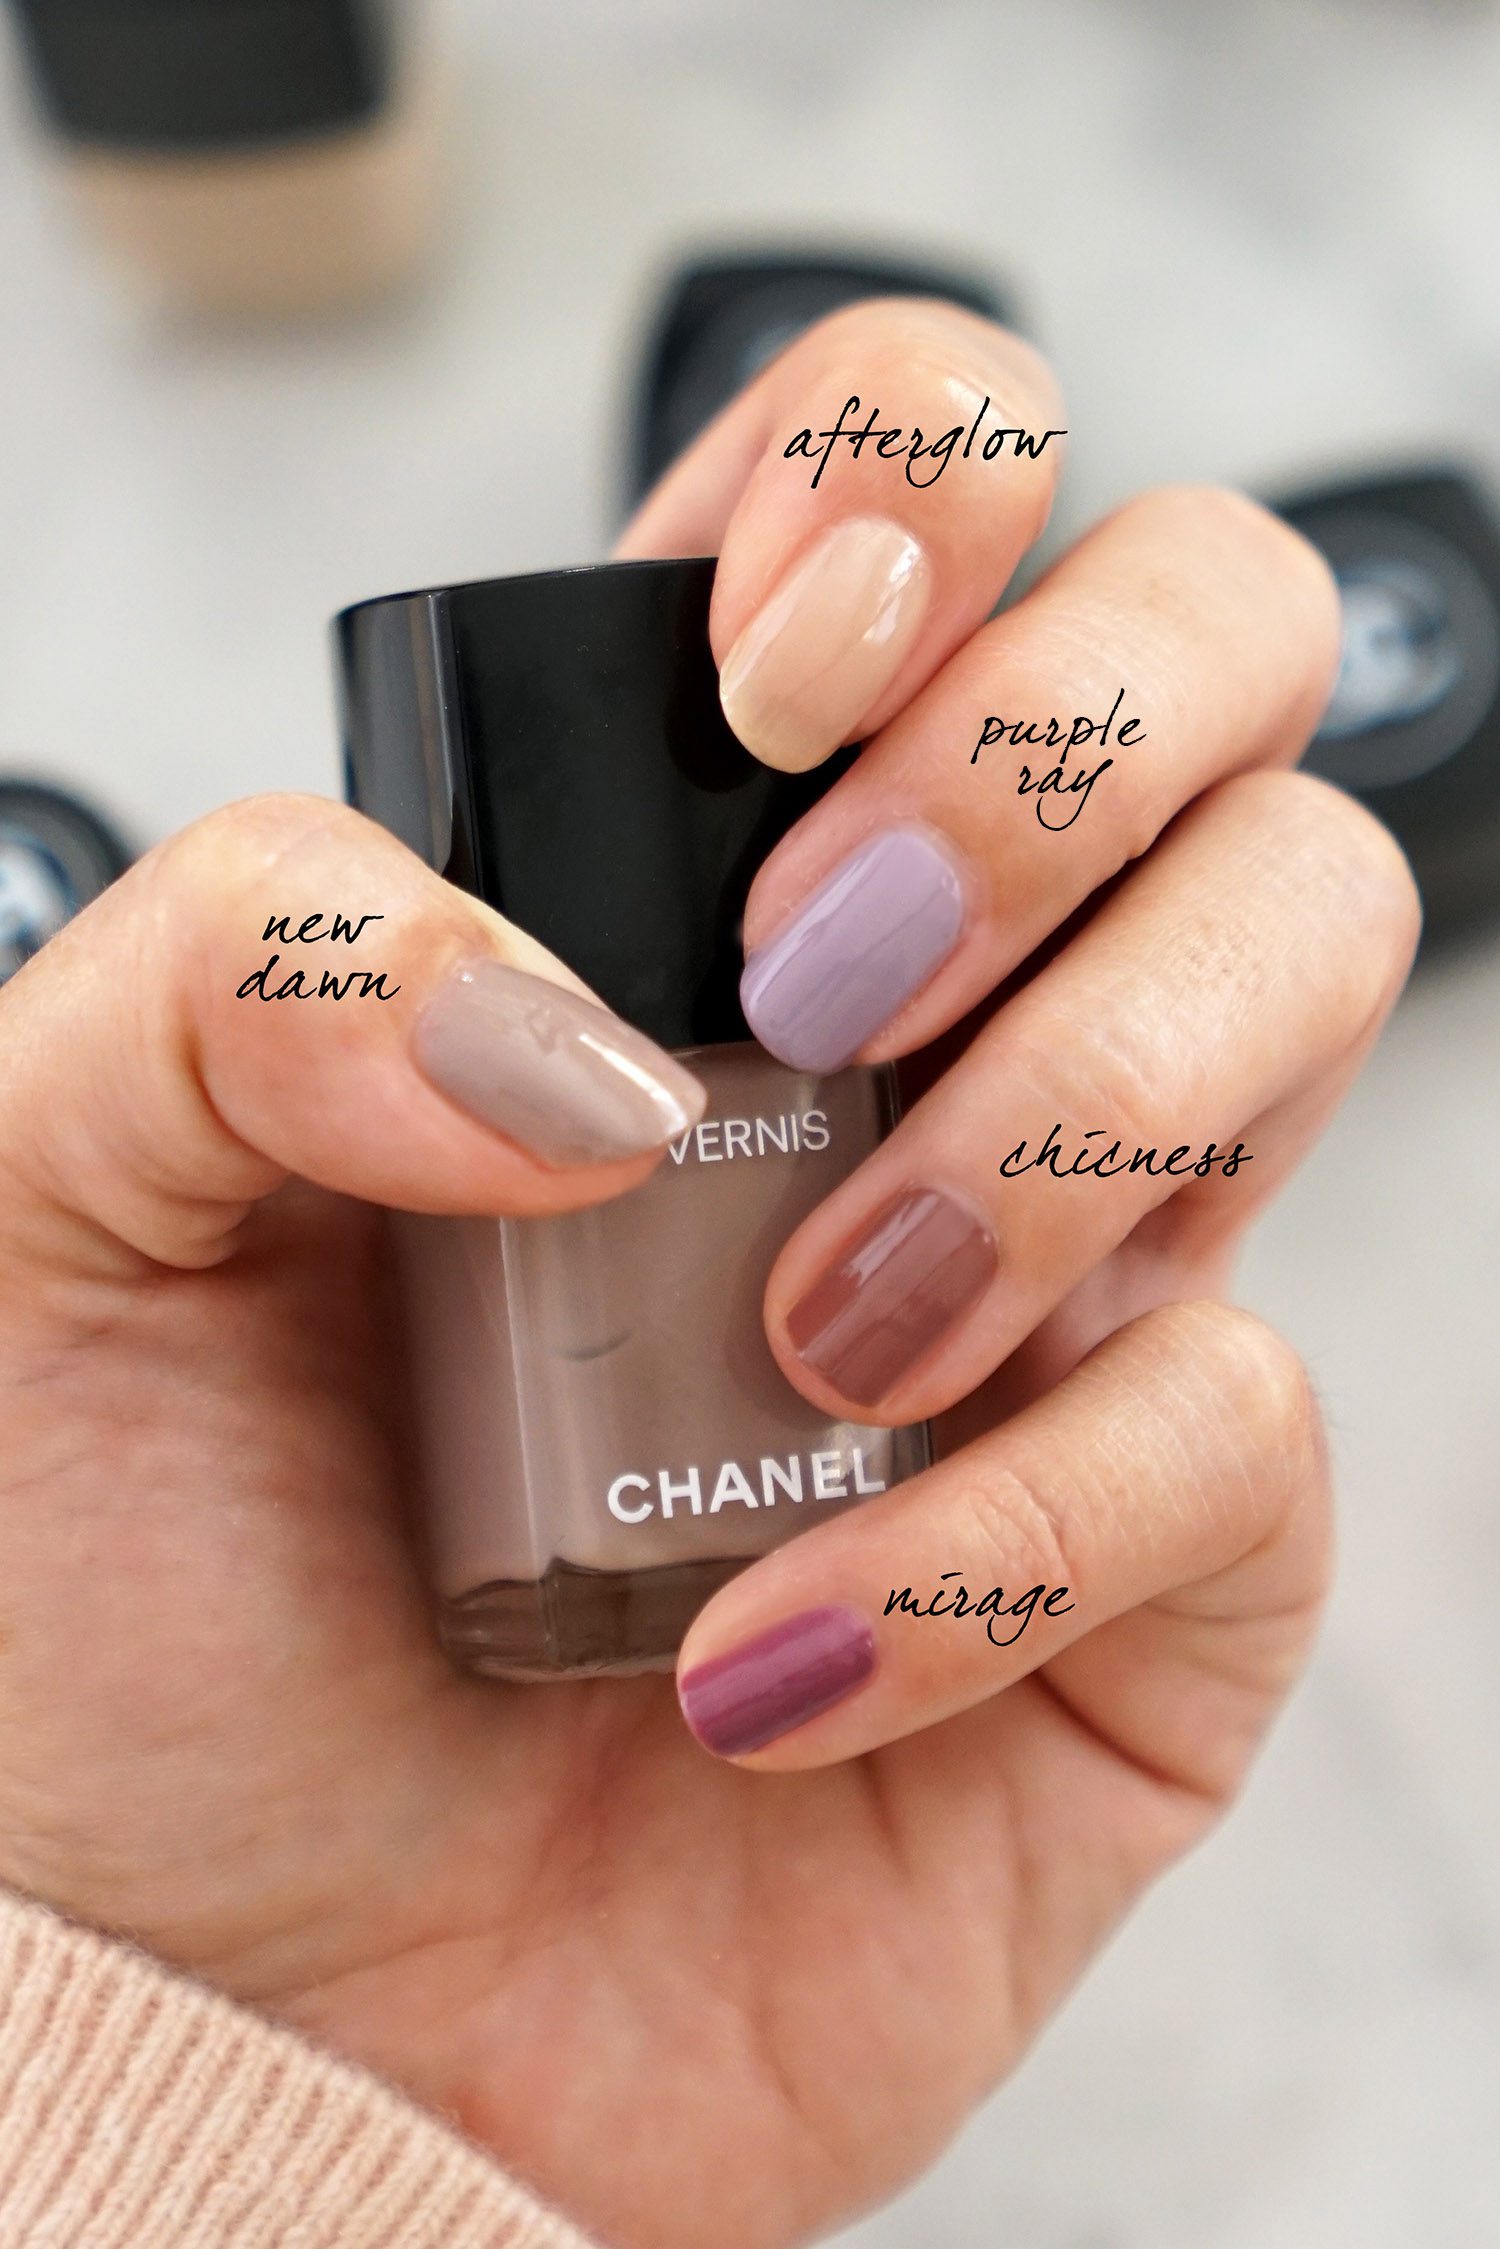 Best Chanel Le Vernis Neutrals + Soft Shades for Spring - The Beauty Look  Book